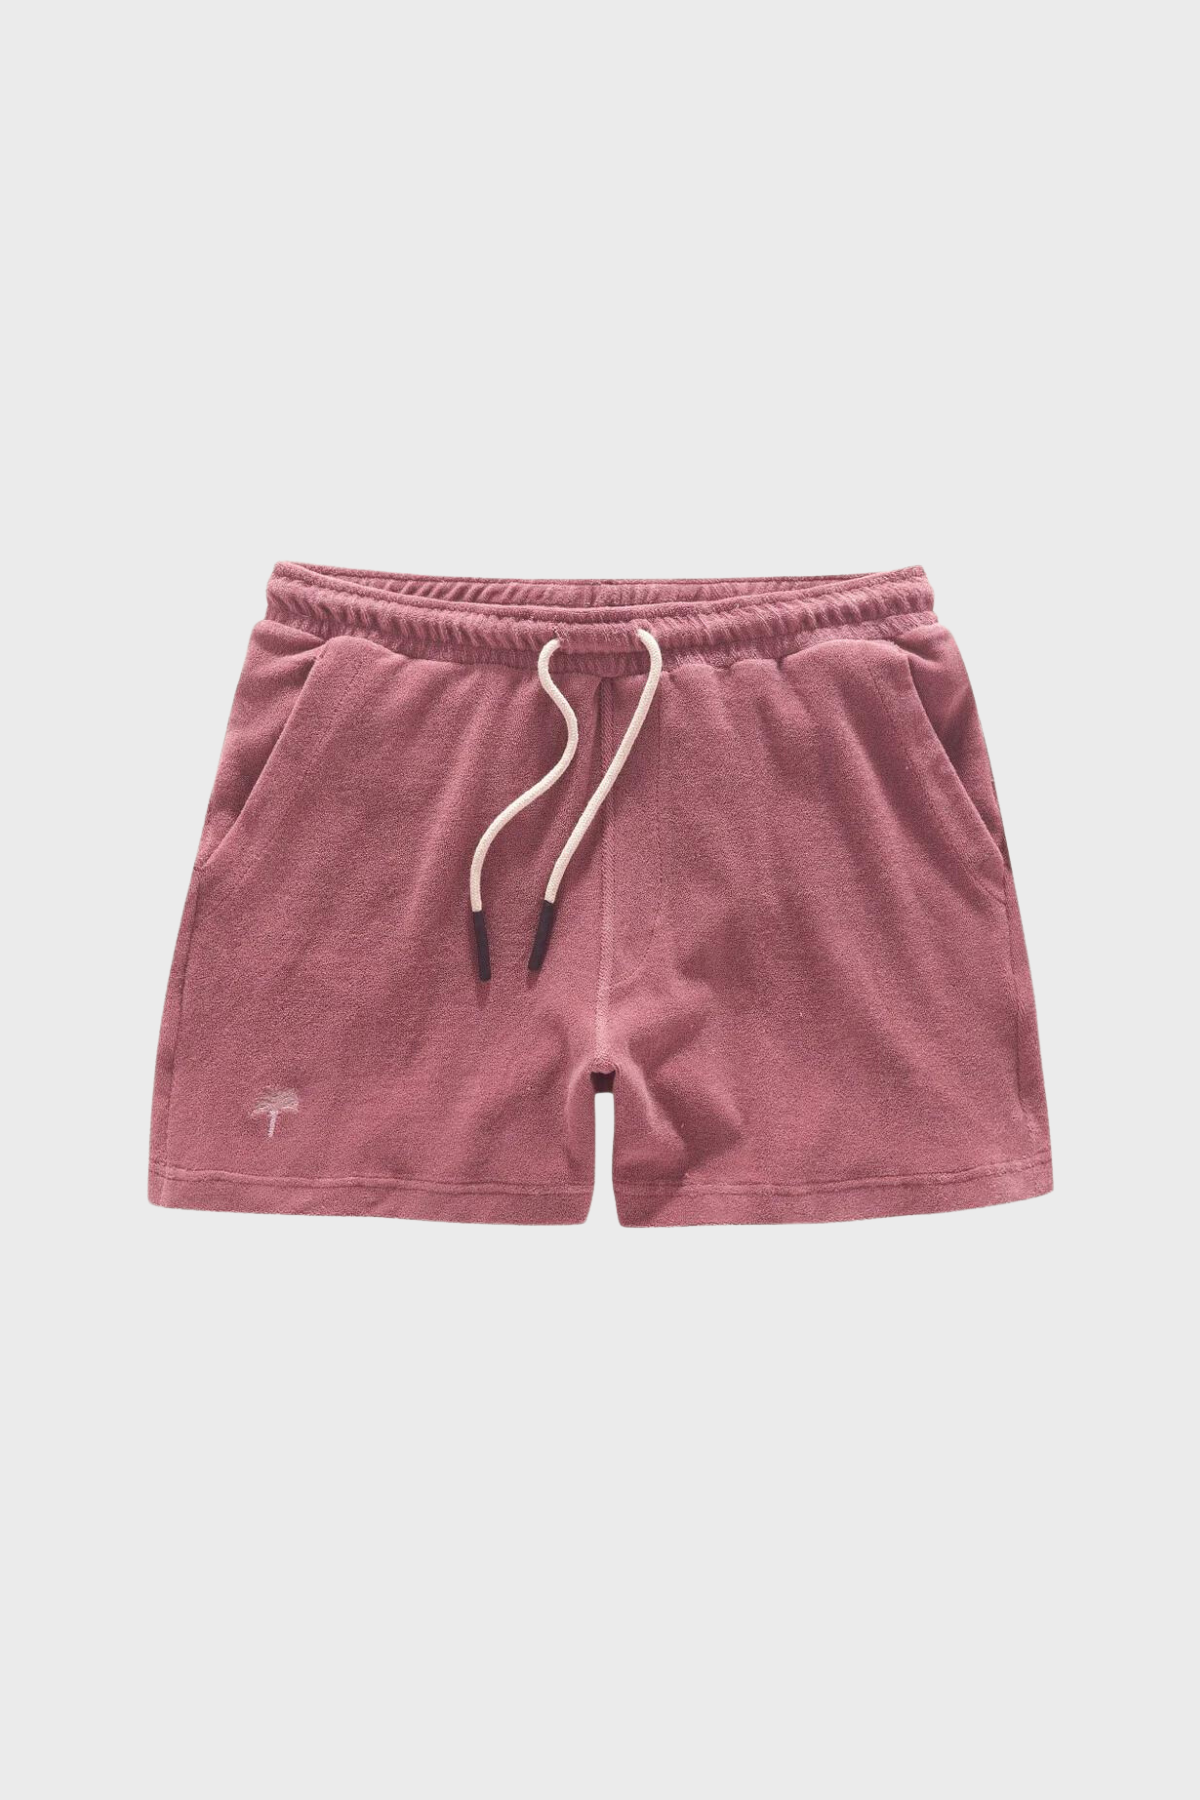 Terry Shorts in Dusty Plum